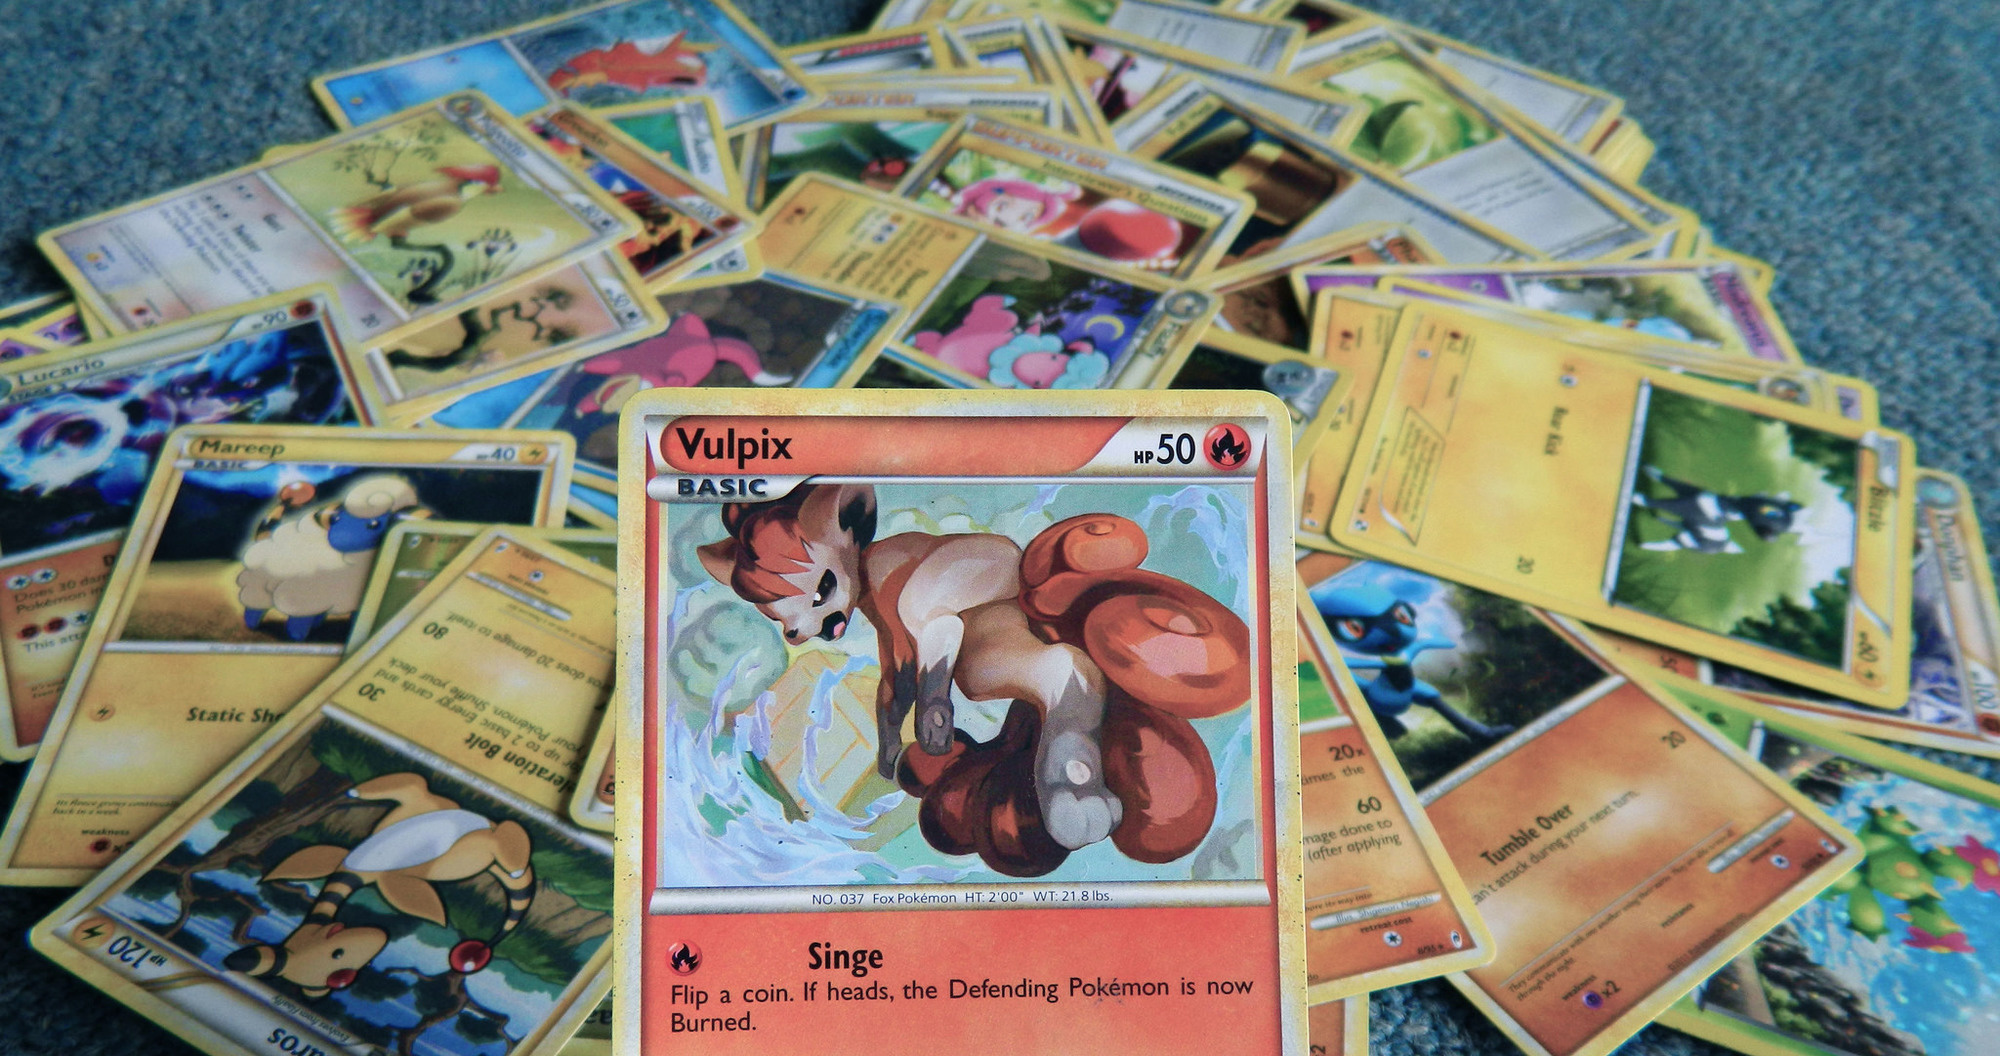 Watching Pokemon on TV and playing with the training cards in real life